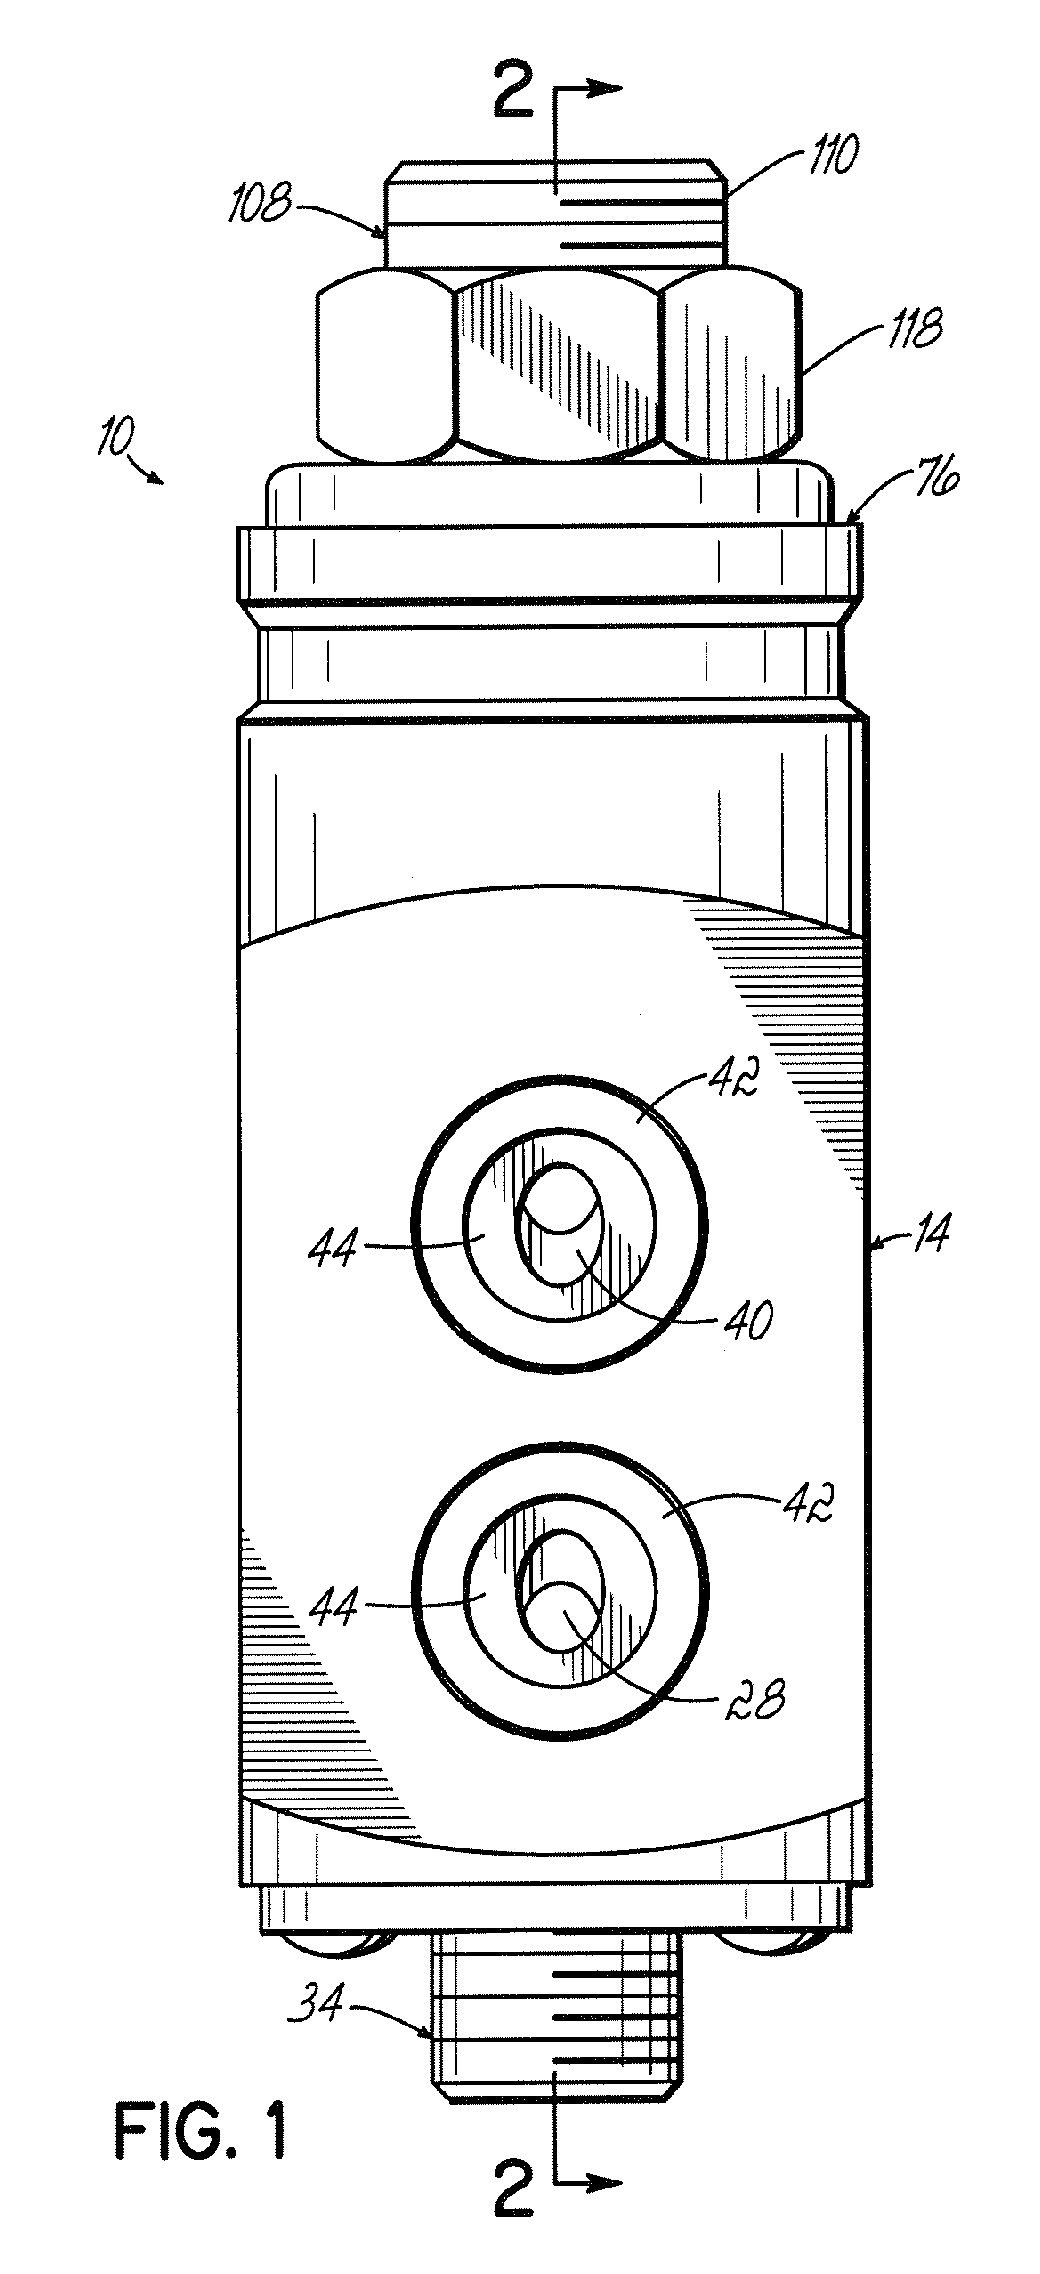 Device for dispensing a heated liquid having a flexible hydraulic seal